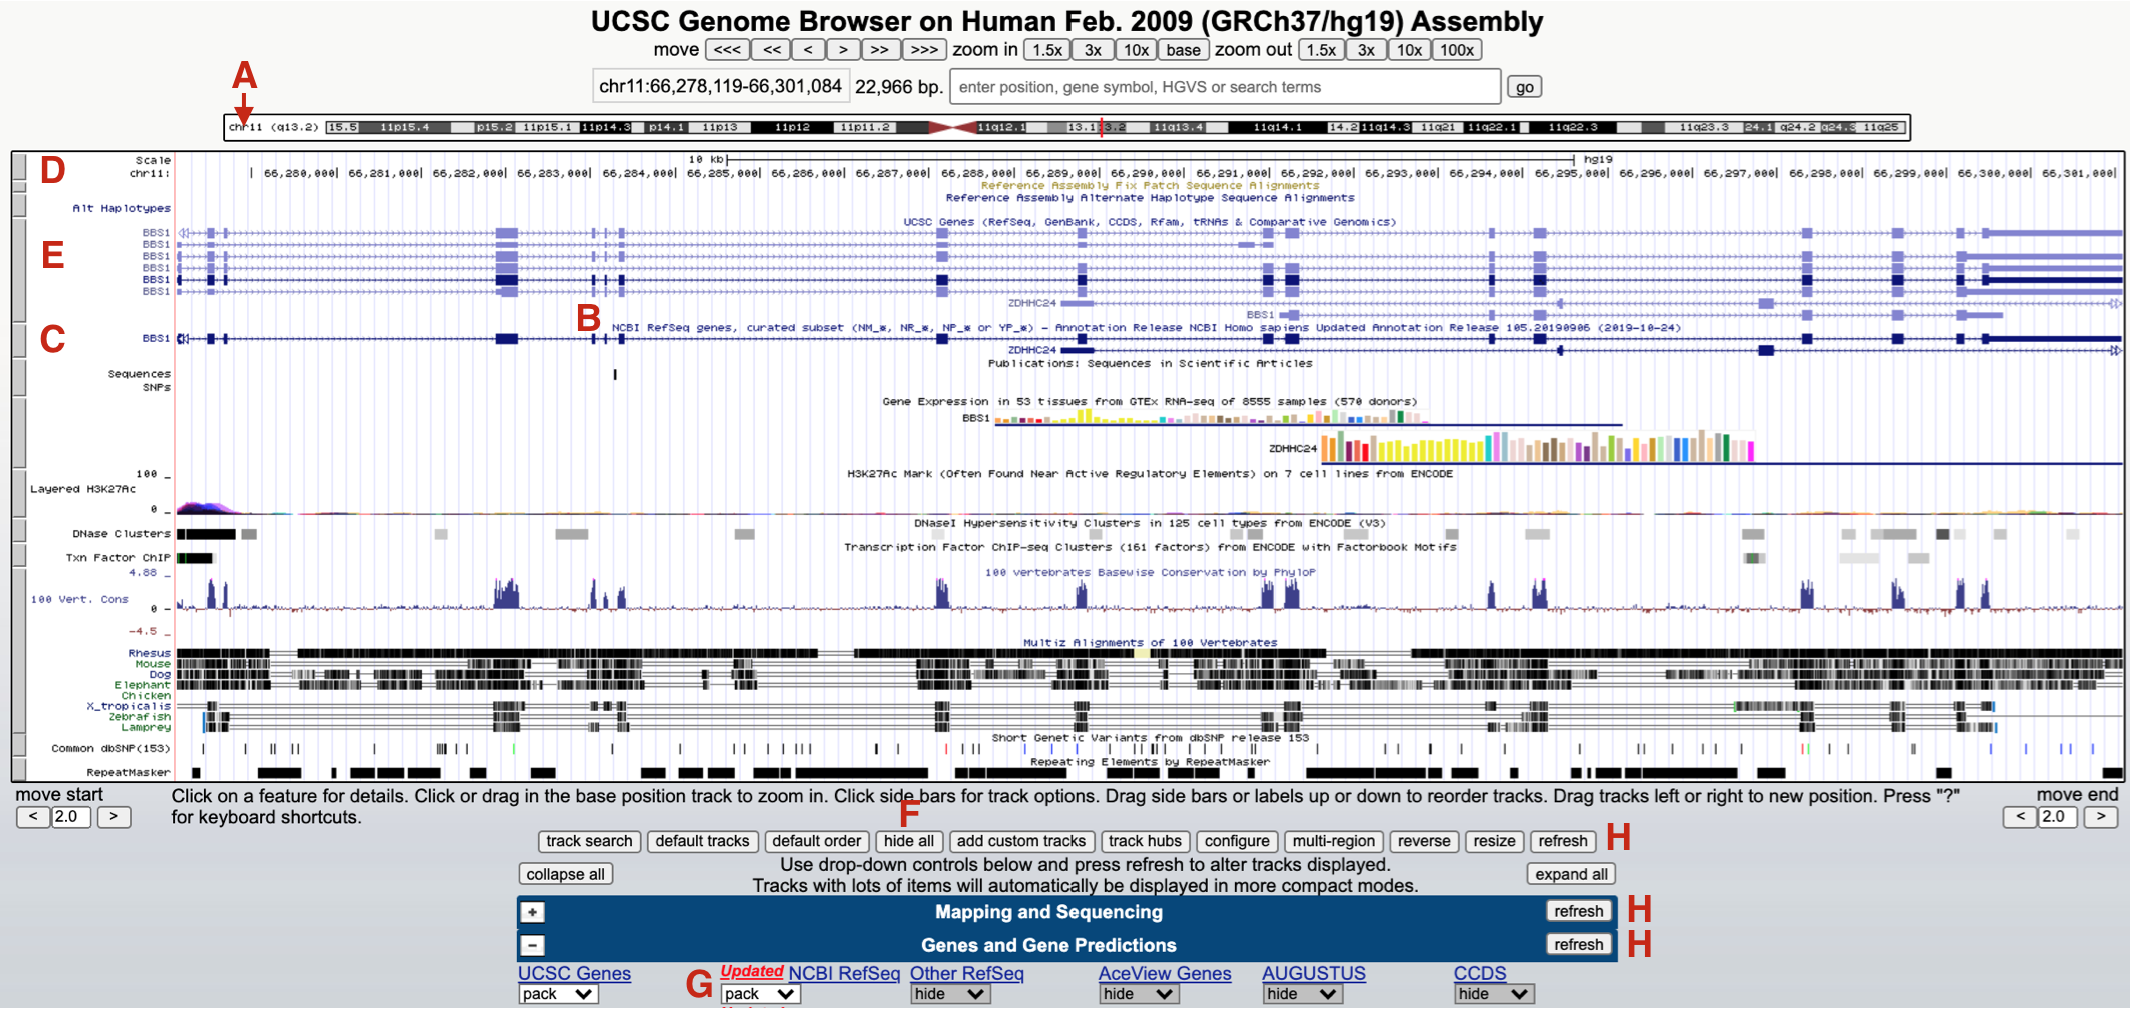 The browser window now focused on a small region of chromosome 11 (A) where BBS1 resides (C and E). Each evidence track includes a track title (B) and is demarcated by a gray rectangle (D, E and C). To hide all tracks click *hide all* (F) and click *refresh* (H). To open the NCBI Refseq track change the pulldown menu from *hide* to *pack* (G).